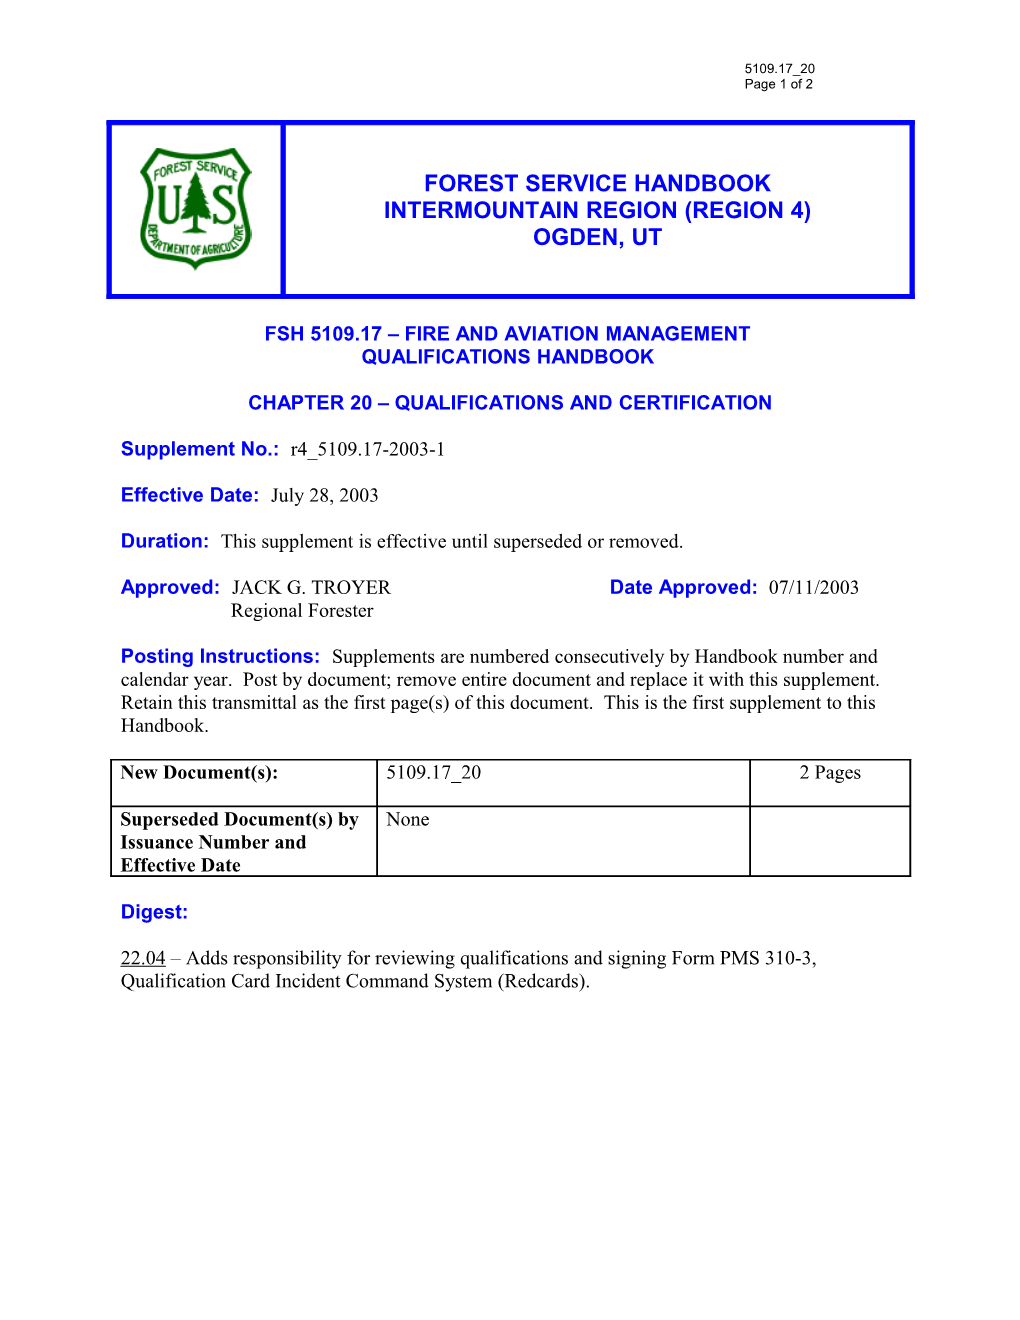 Fsh 5109.17 Fire and Aviation Management